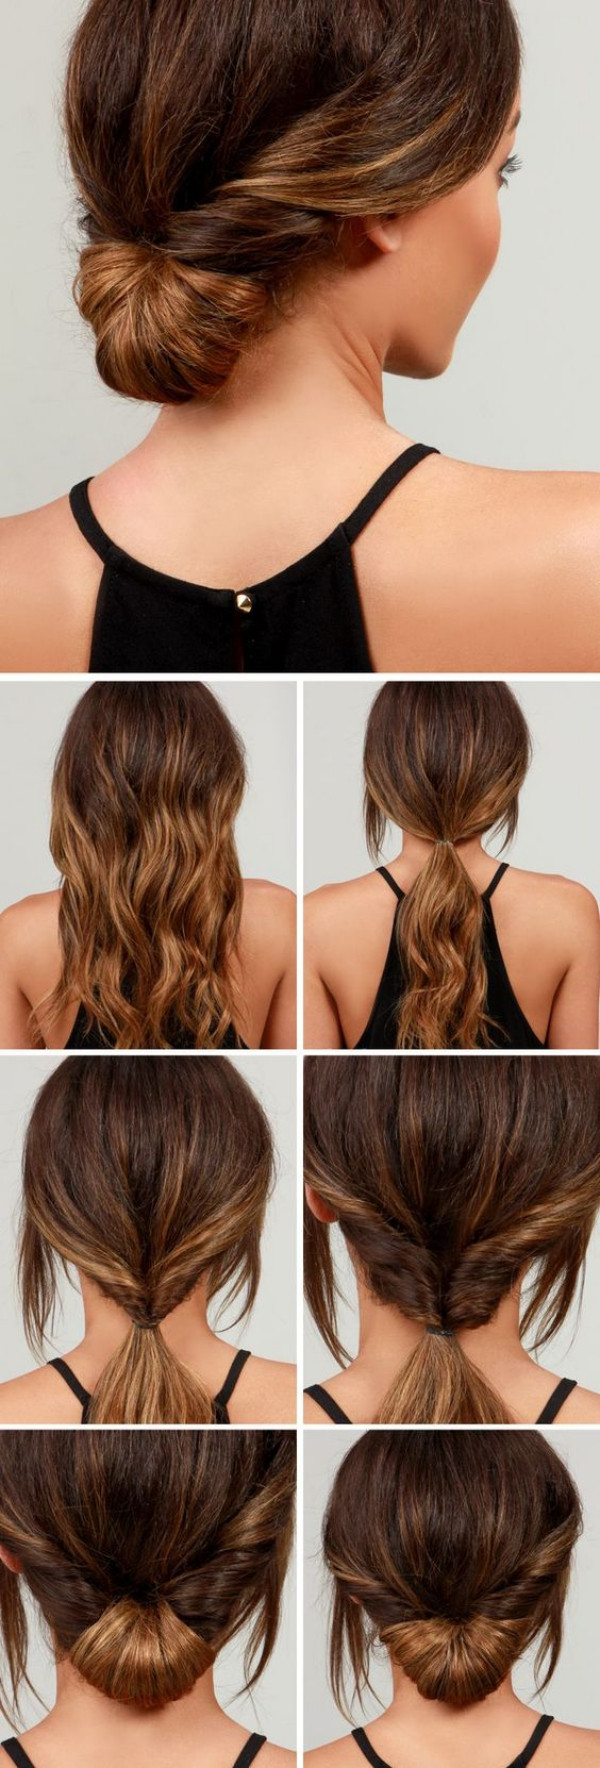 Cute Easy Summer Hairstyles
 60 Simple Five Minute Hairstyles for fice Women